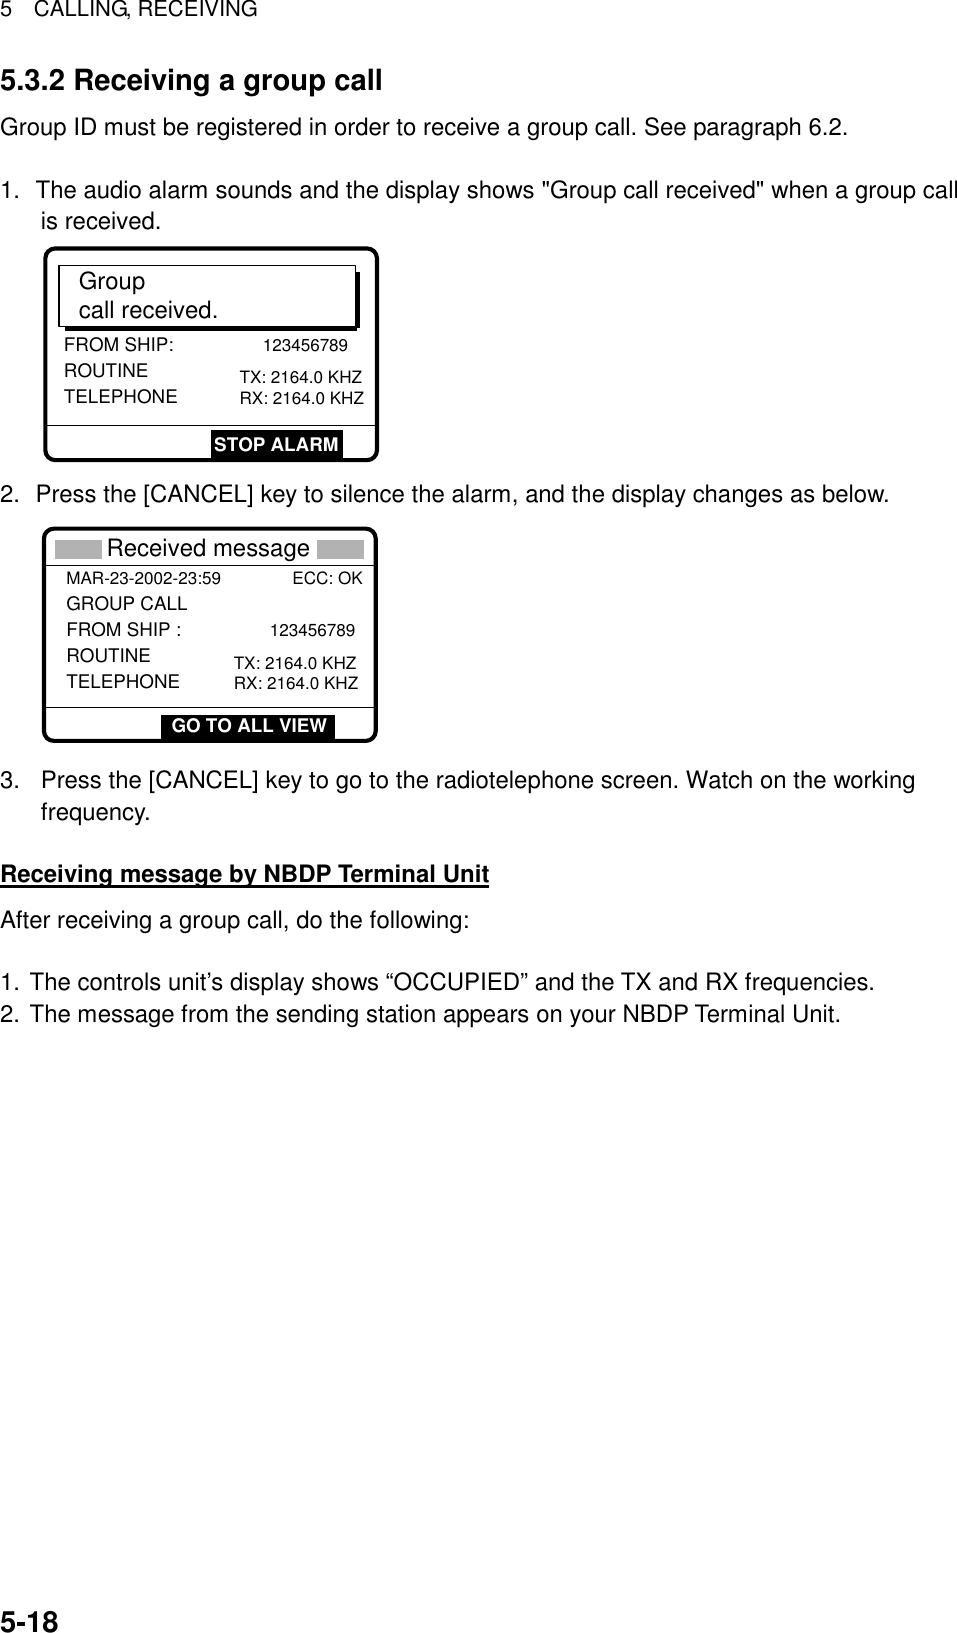 5  CALLING, RECEIVING  5-185.3.2 Receiving a group call Group ID must be registered in order to receive a group call. See paragraph 6.2.  1.  The audio alarm sounds and the display shows &quot;Group call received&quot; when a group call is received. FROM SHIP:            123456789 ROUTINETELEPHONE       TX: 2164.0 KHZRX: 2164.0 KHZGroupcall received.STOP ALARM 2.  Press the [CANCEL] key to silence the alarm, and the display changes as below.     * Received message *MAR-23-2002-23:59               ECC: OKGROUP CALL FROM SHIP :             123456789 ROUTINETELEPHONE       TX: 2164.0 KHZRX: 2164.0 KHZGO TO ALL VIEW 3.  Press the [CANCEL] key to go to the radiotelephone screen. Watch on the working frequency.  Receiving message by NBDP Terminal Unit After receiving a group call, do the following:  1. The controls unit’s display shows “OCCUPIED” and the TX and RX frequencies. 2. The message from the sending station appears on your NBDP Terminal Unit.      